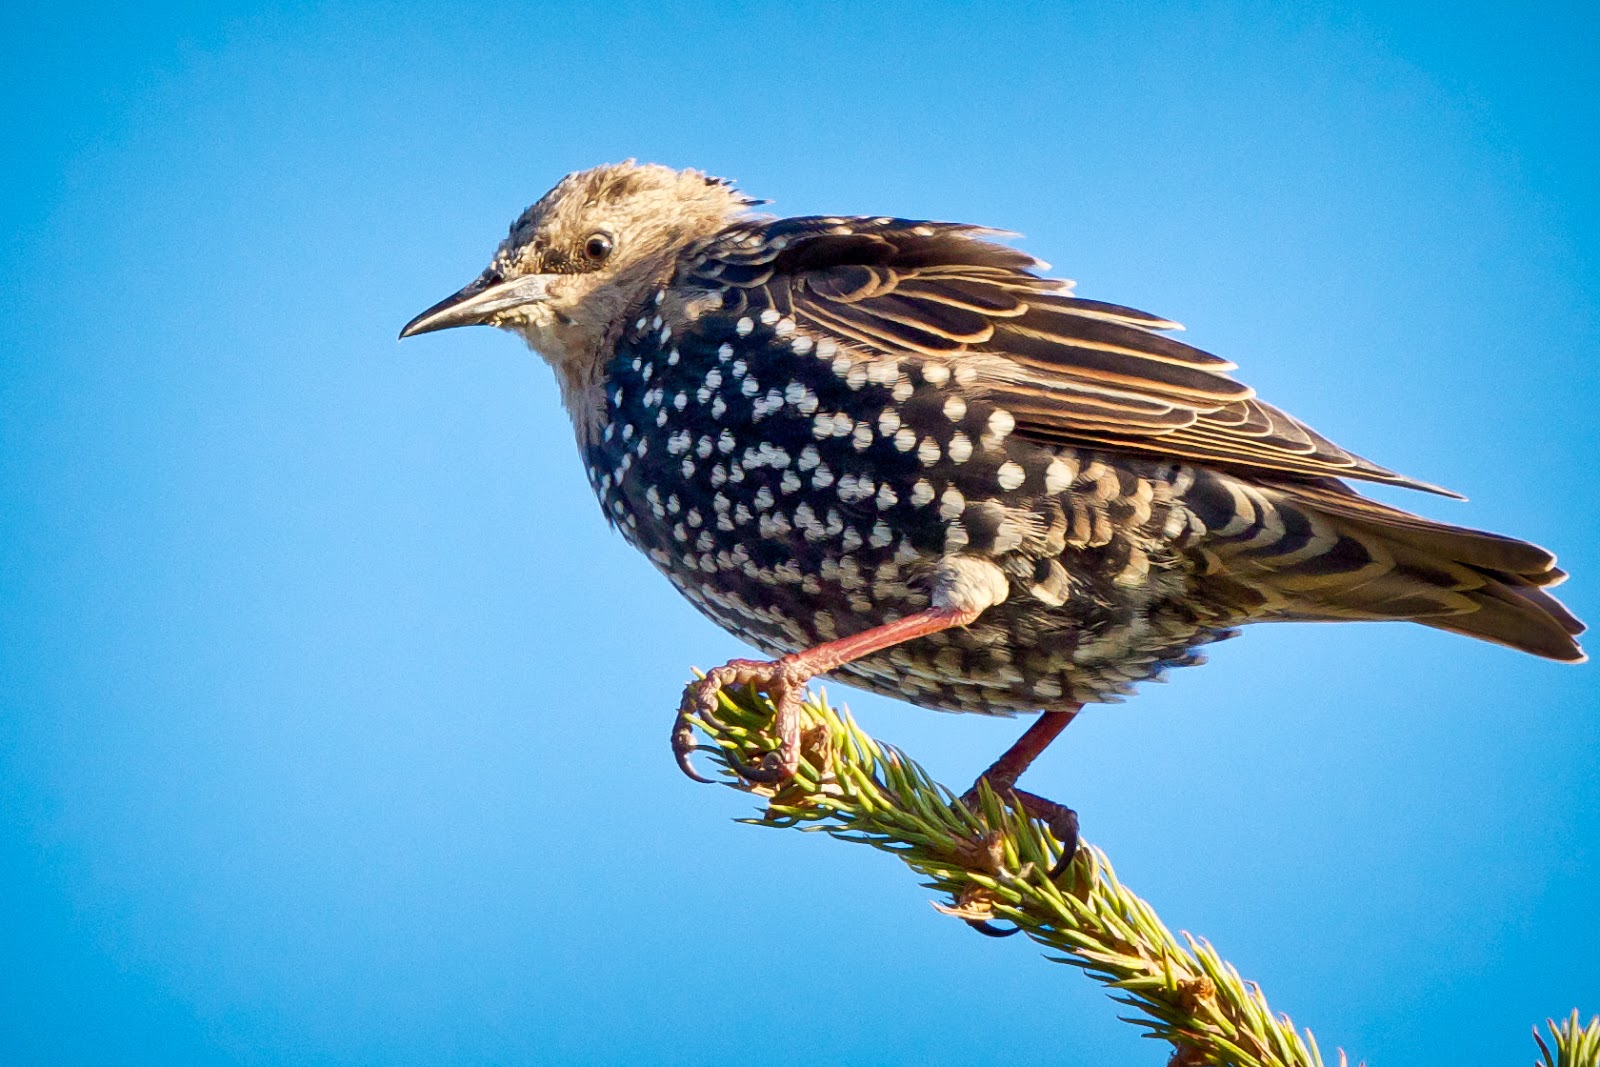 Feather Tailed Stories: European Starling